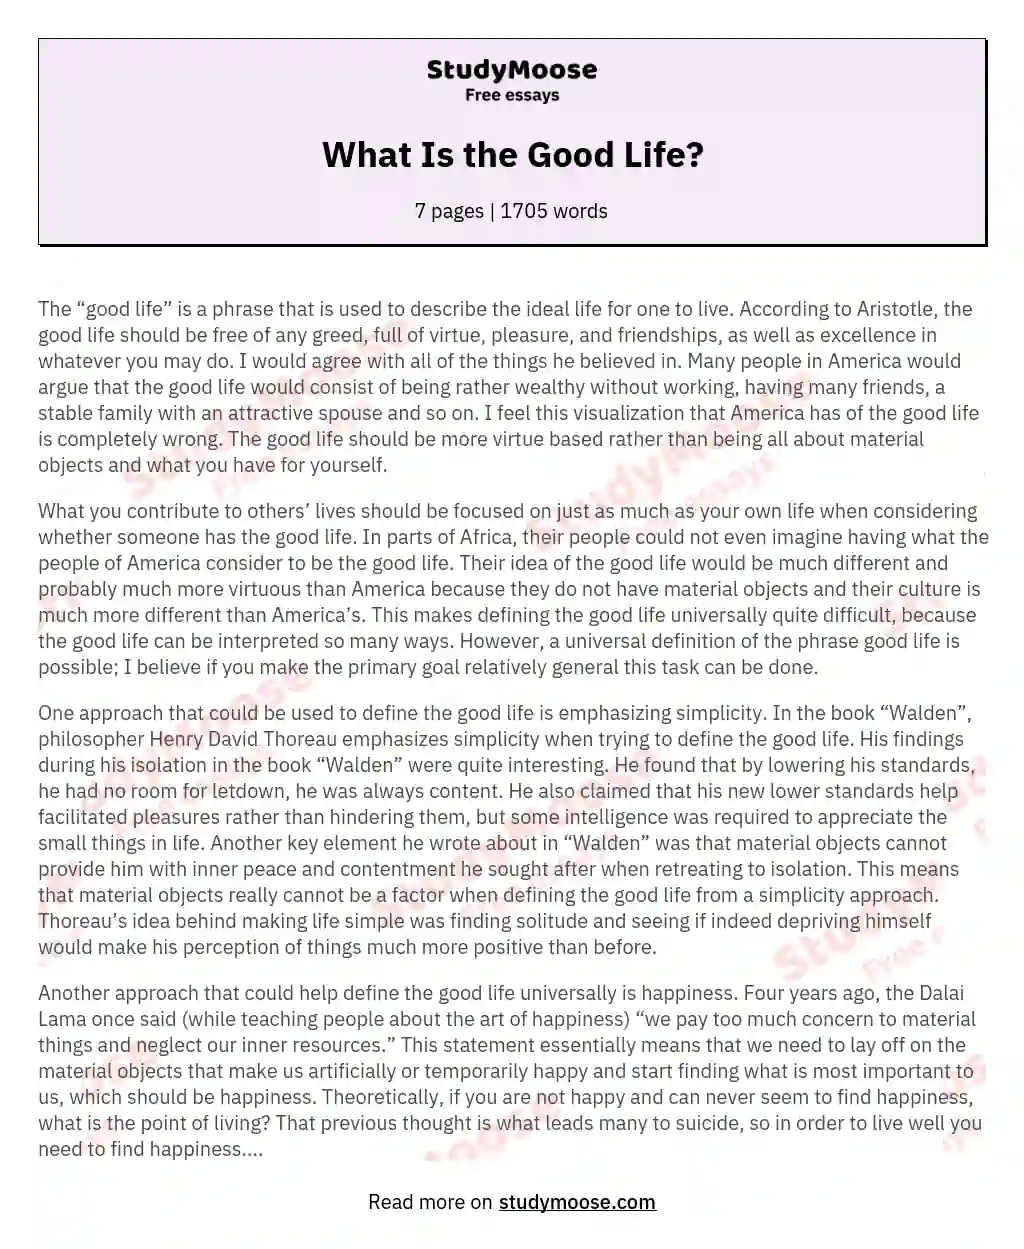 What Is the Good Life? essay